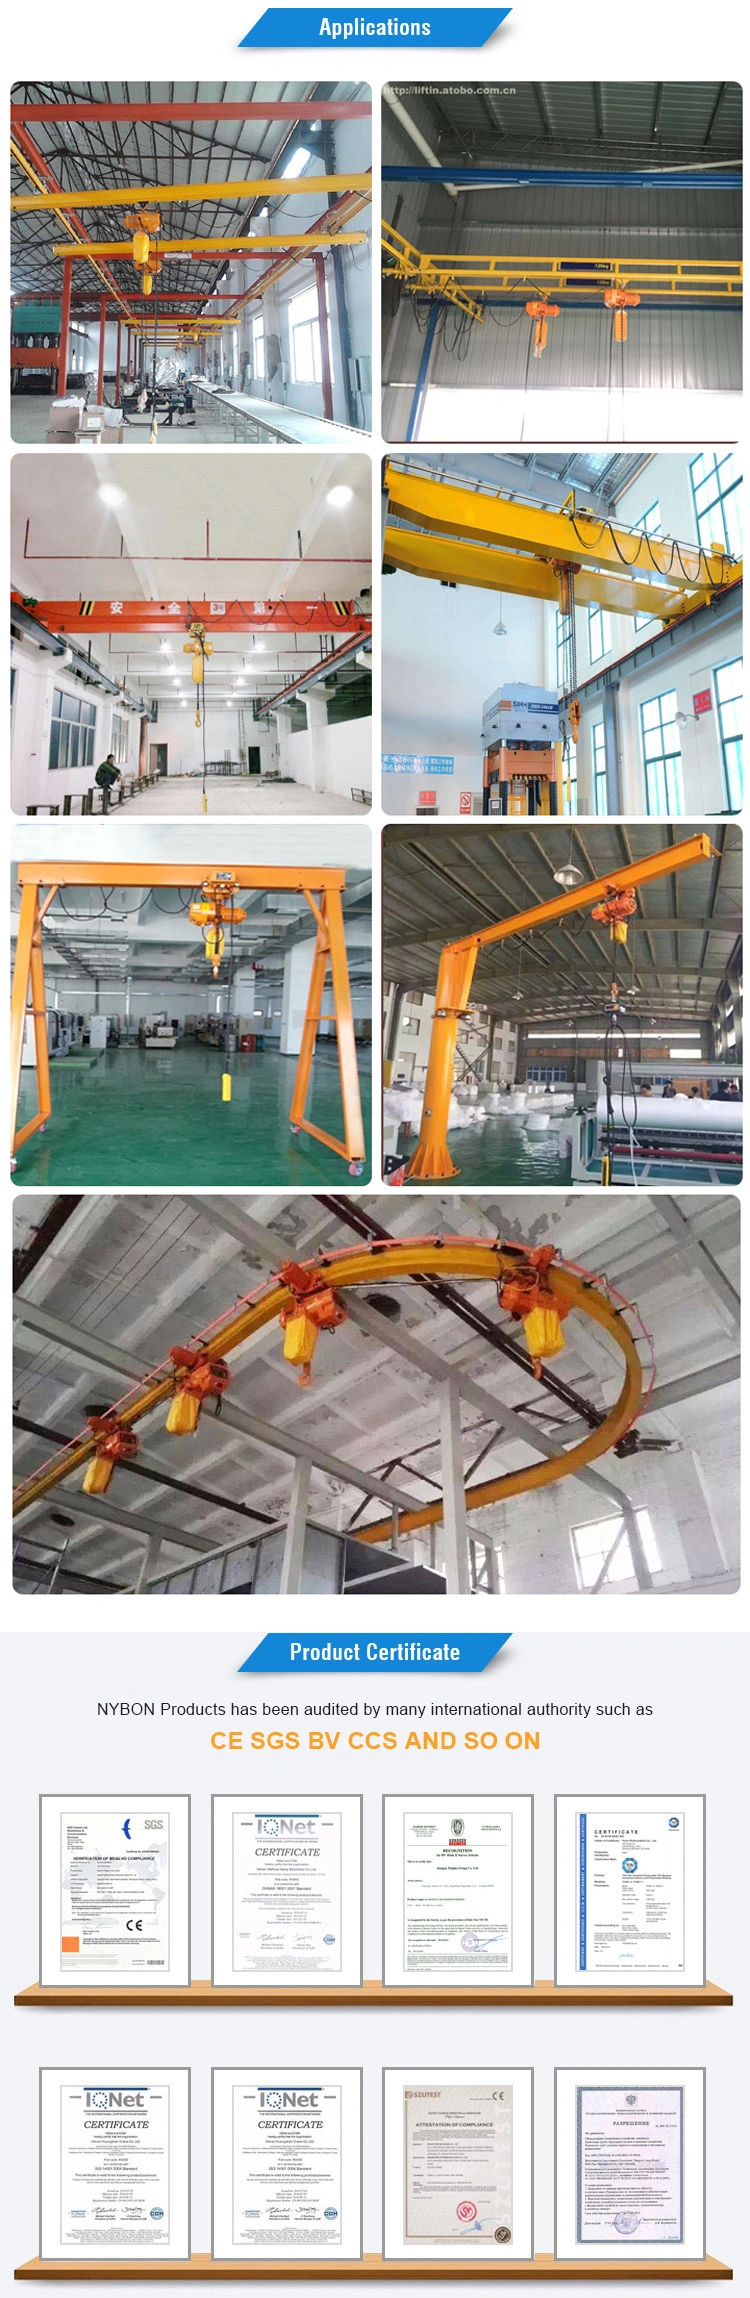 Hot Sale Portable 1.5 Ton Electric Chain Hoist for Lifting Cargo